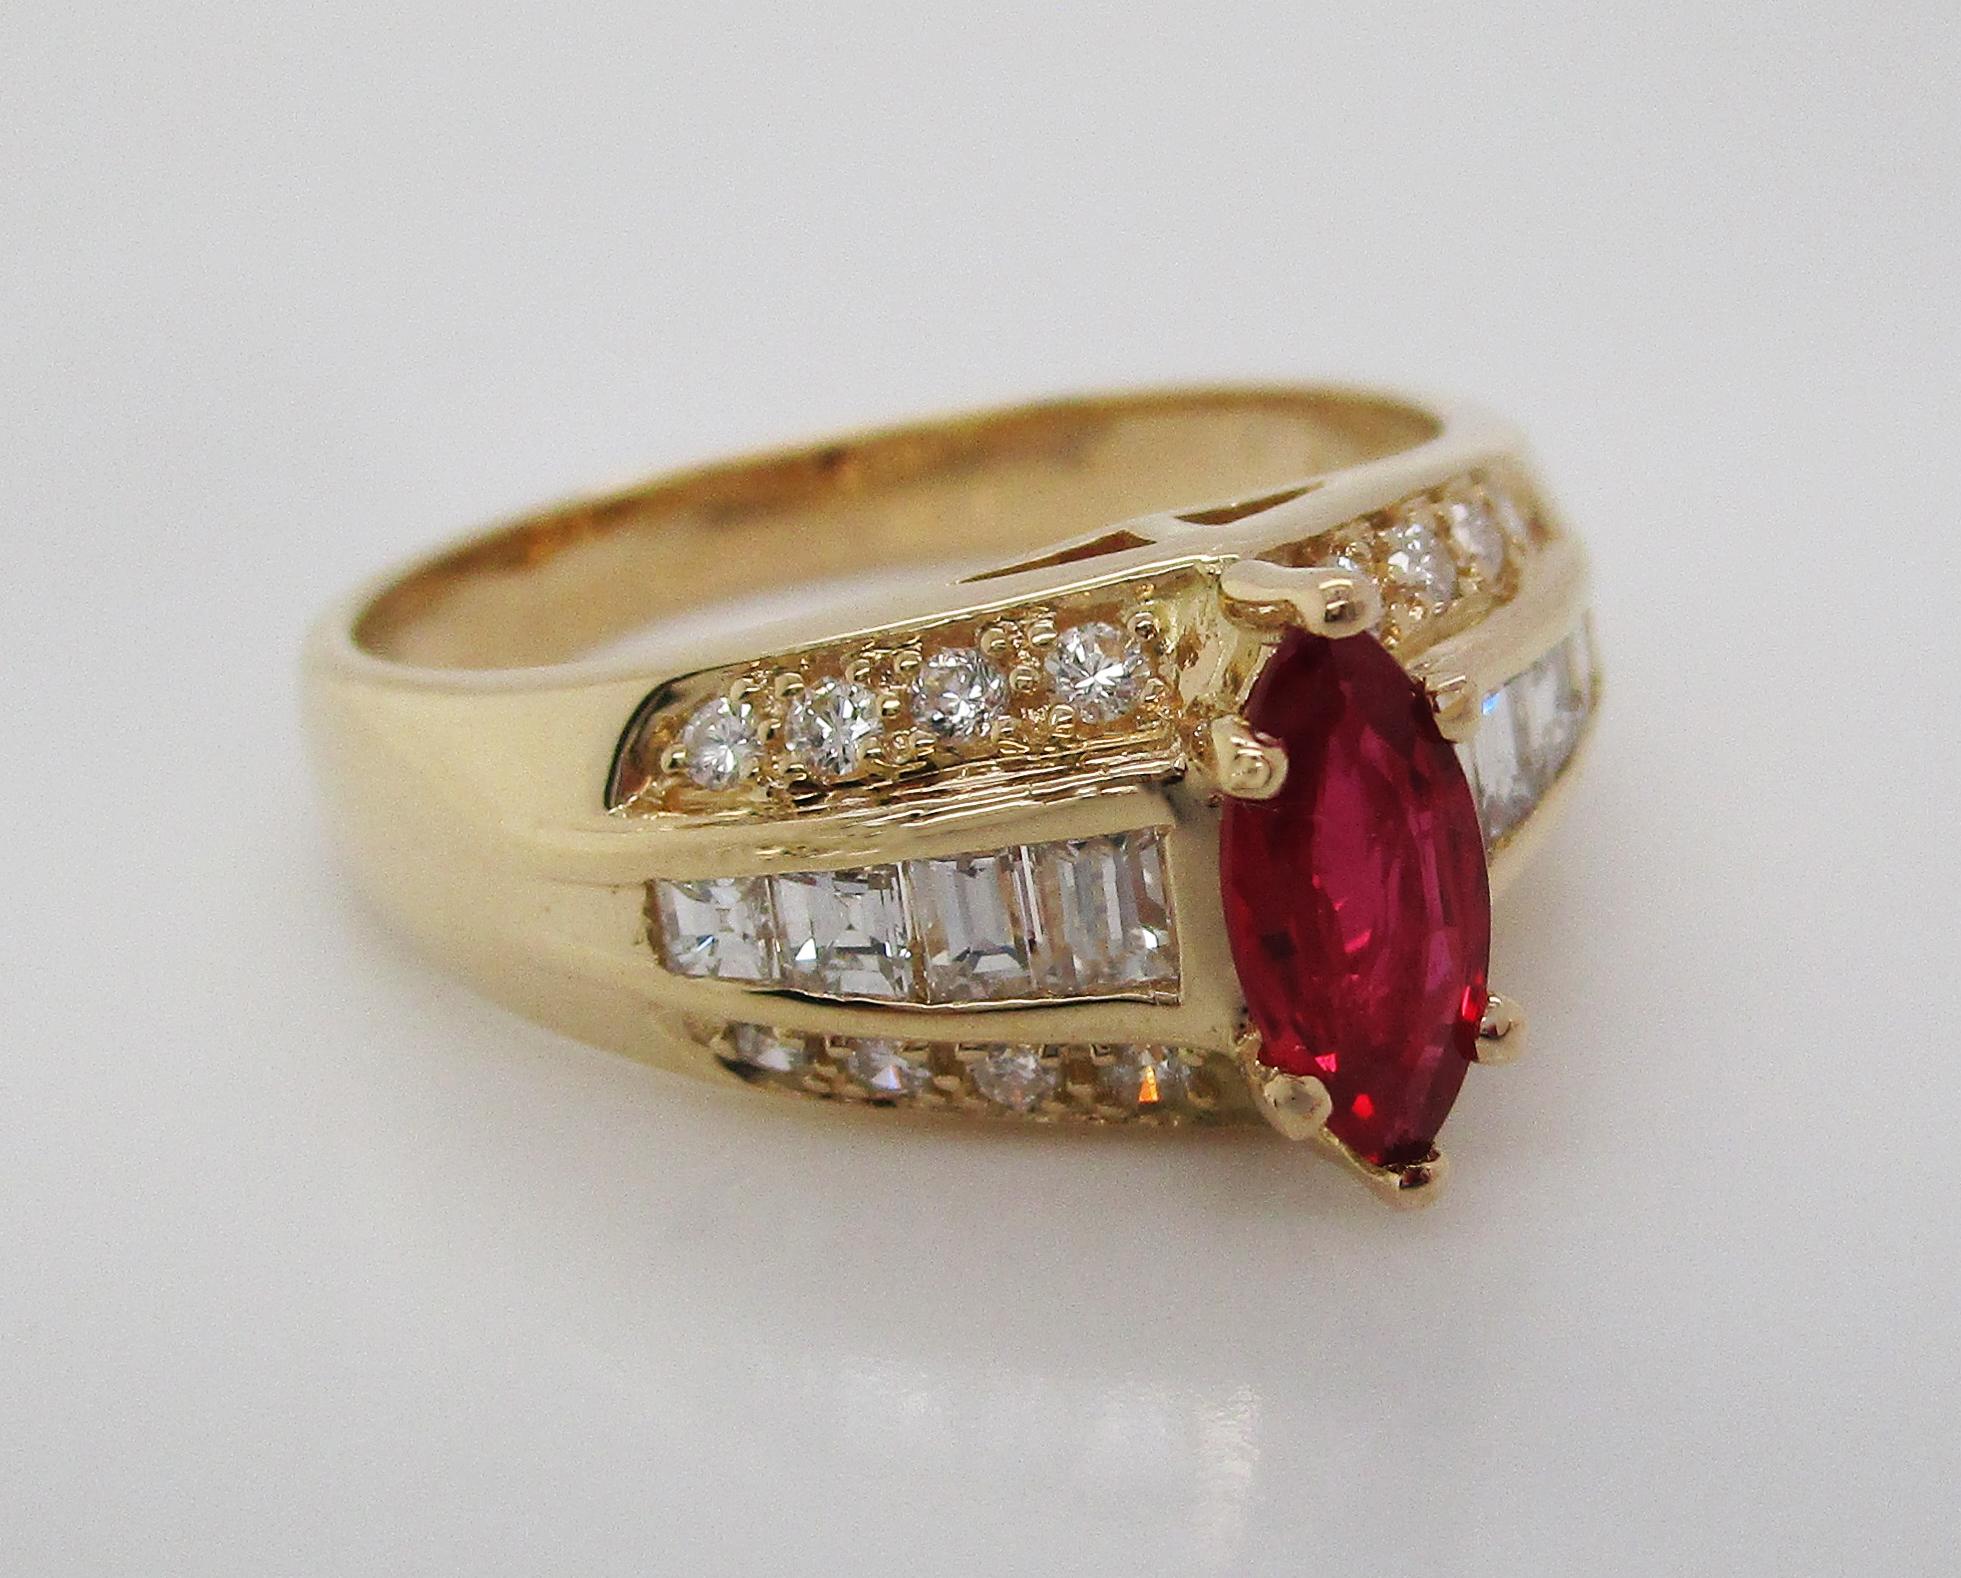 Modernist Midcentury 14 Karat Yellow Gold Diamond and Ruby Cocktail Ring